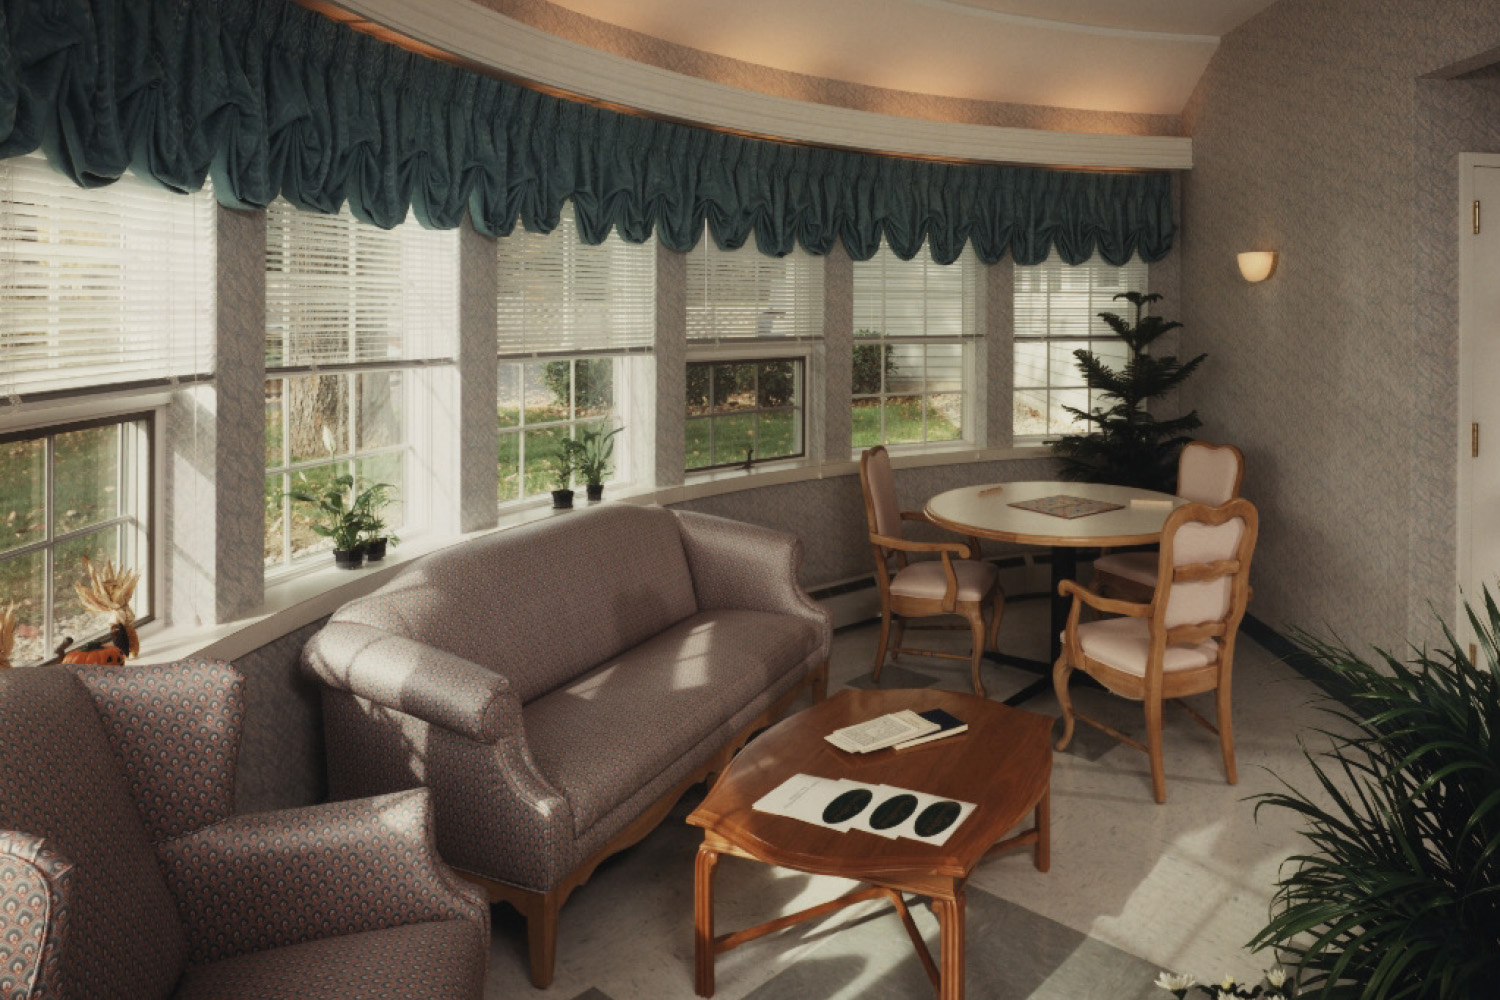 Living room with tan couches in front of panoramic large windows